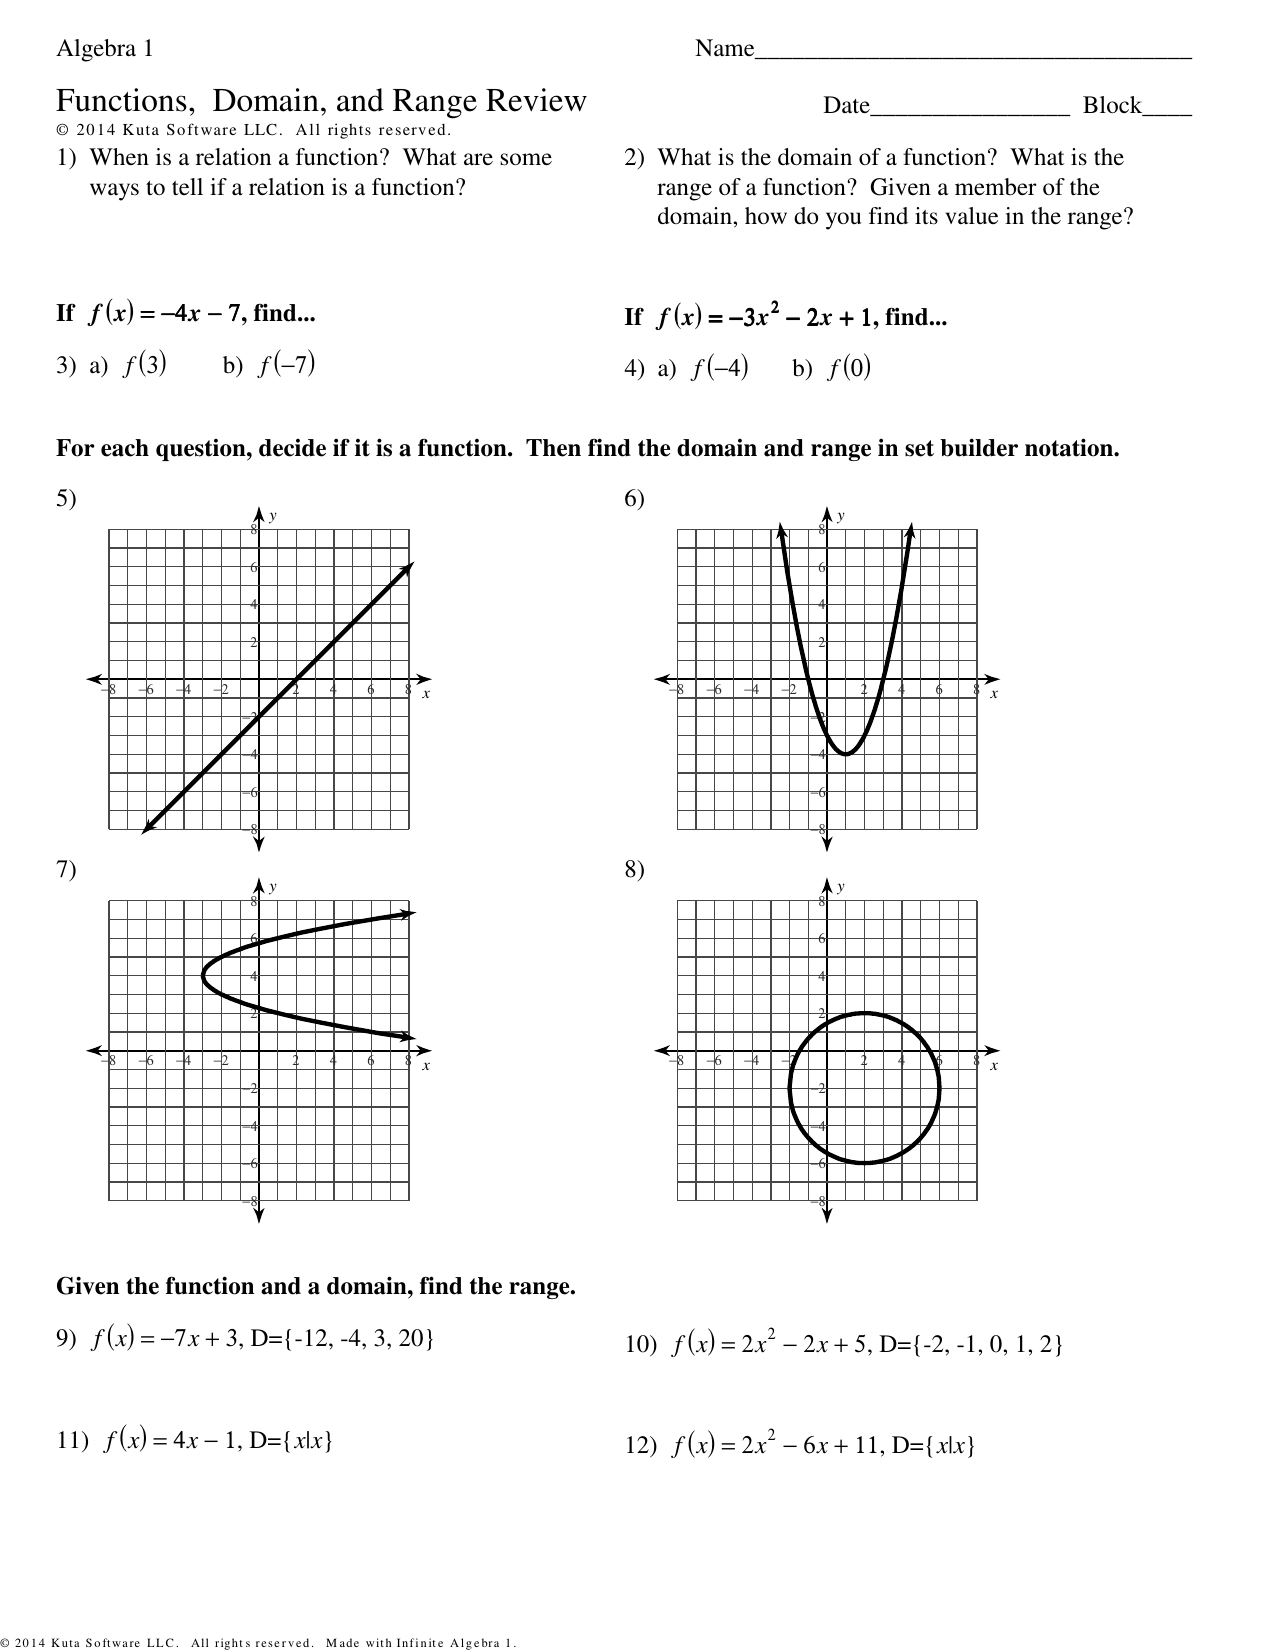 Algebra 1 Functions Domain And Range Review For Domain And Range Worksheet Algebra 1